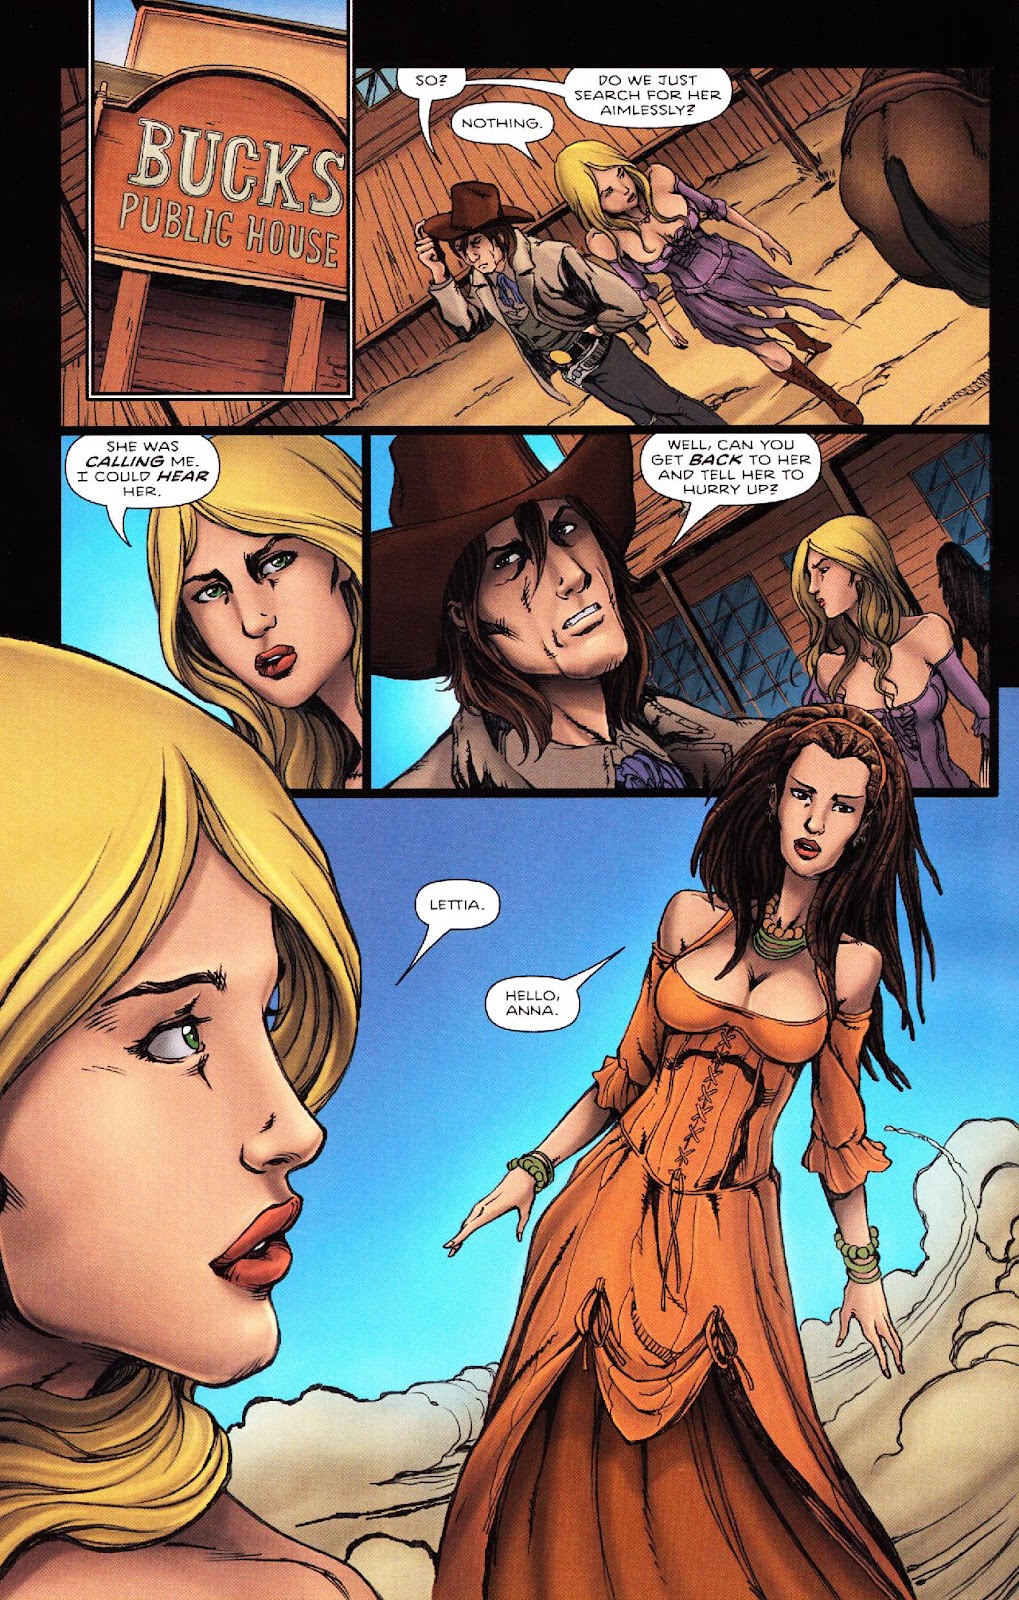 Salem's Daughter: The Haunting issue 3 - Page 13